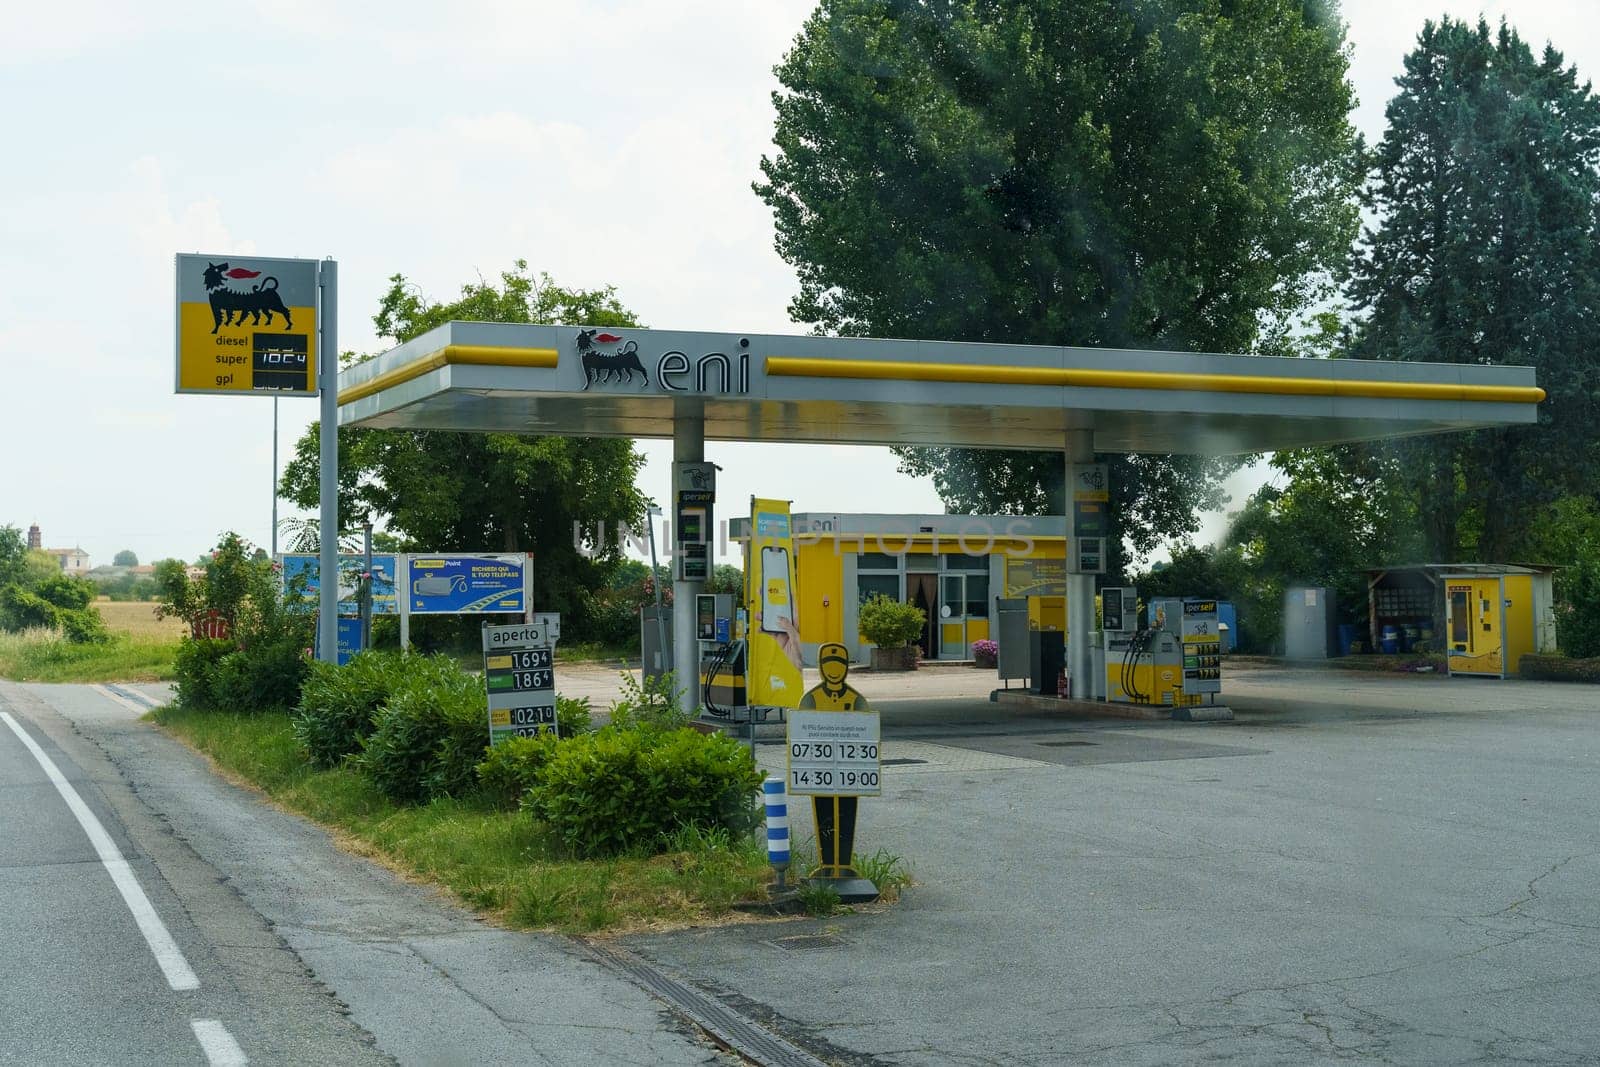 Eni gas station of the Italian oil company next to the road. by Sd28DimoN_1976